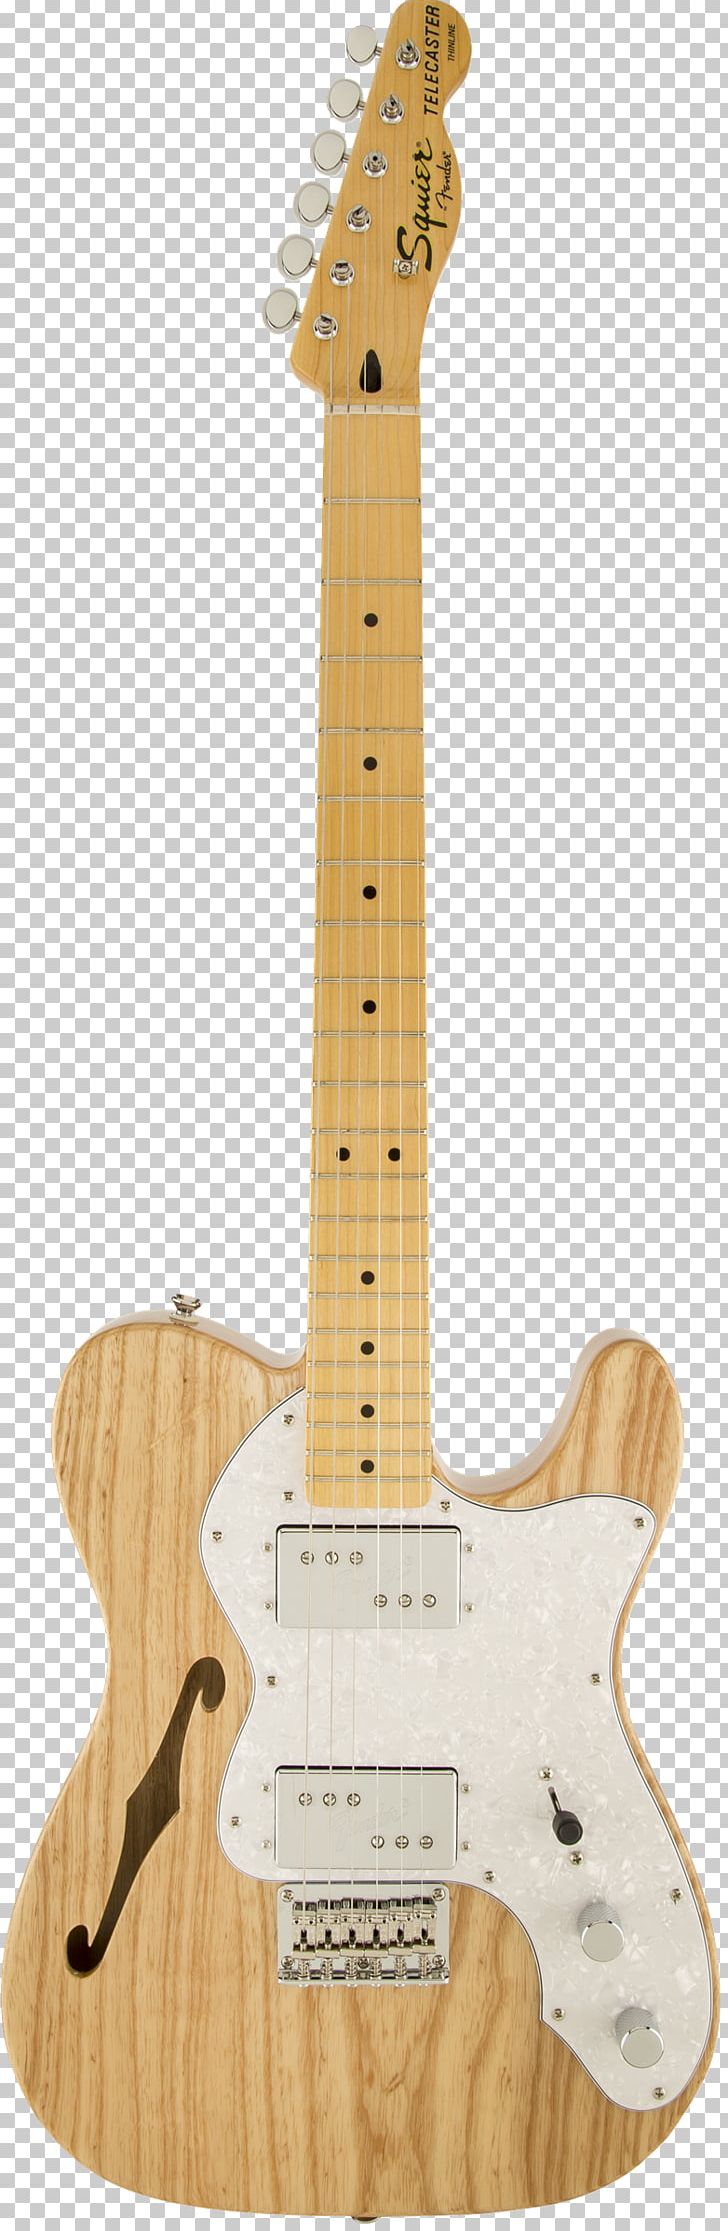 Fender Telecaster Thinline Fender Stratocaster Squier Musical Instruments PNG, Clipart, Acoustic Electric Guitar, Guitar Accessory, Musical Instrument, Musical Instruments, Objects Free PNG Download